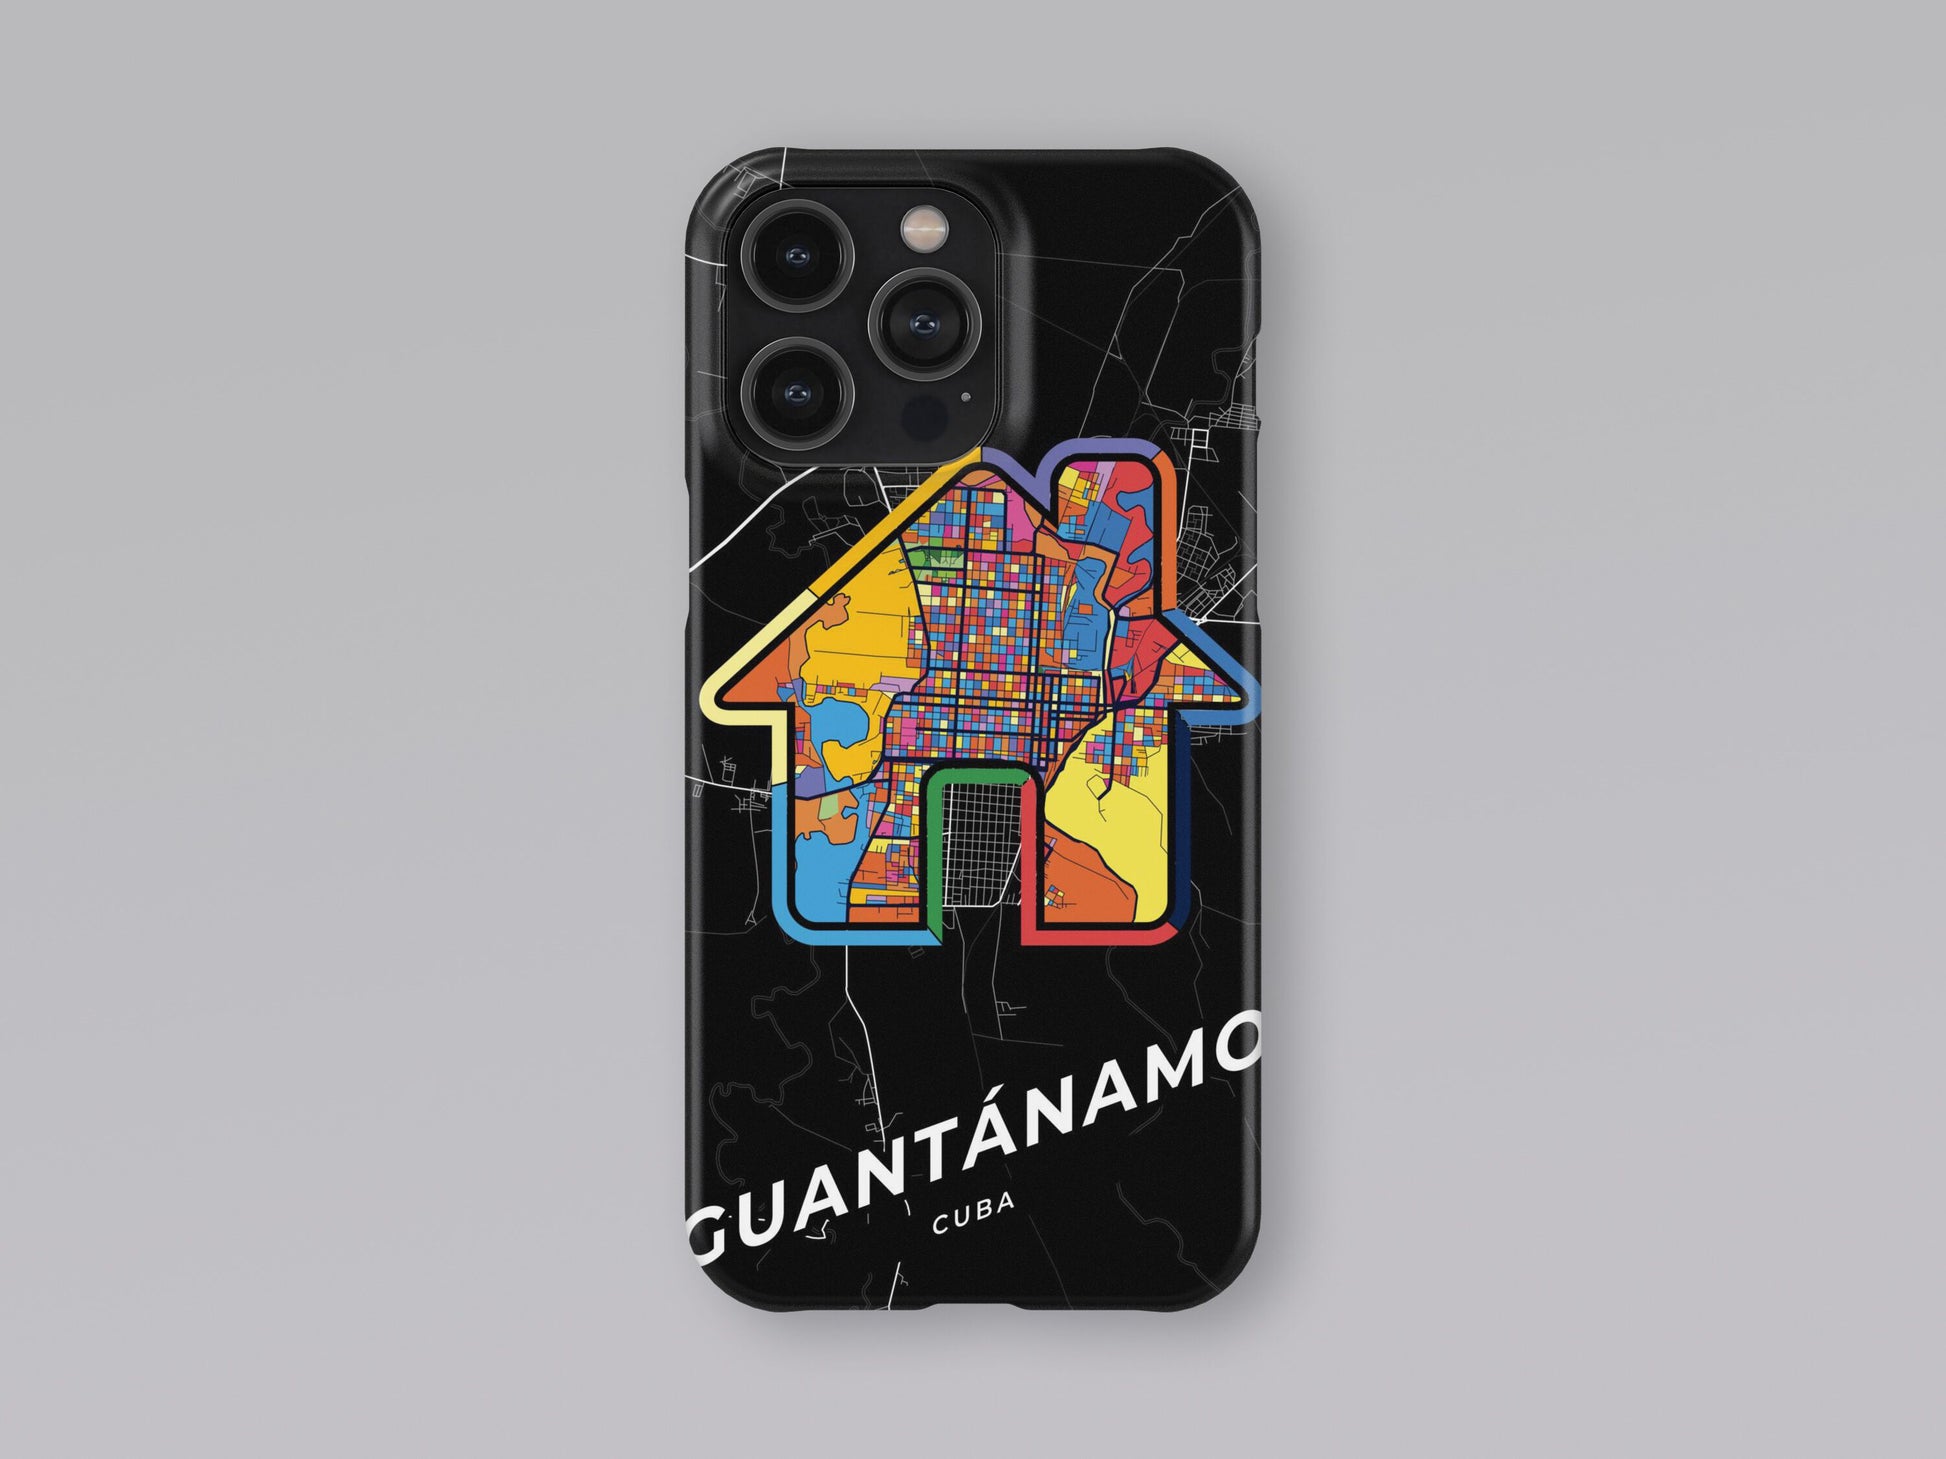 Guantánamo Cuba slim phone case with colorful icon. Birthday, wedding or housewarming gift. Couple match cases. 3